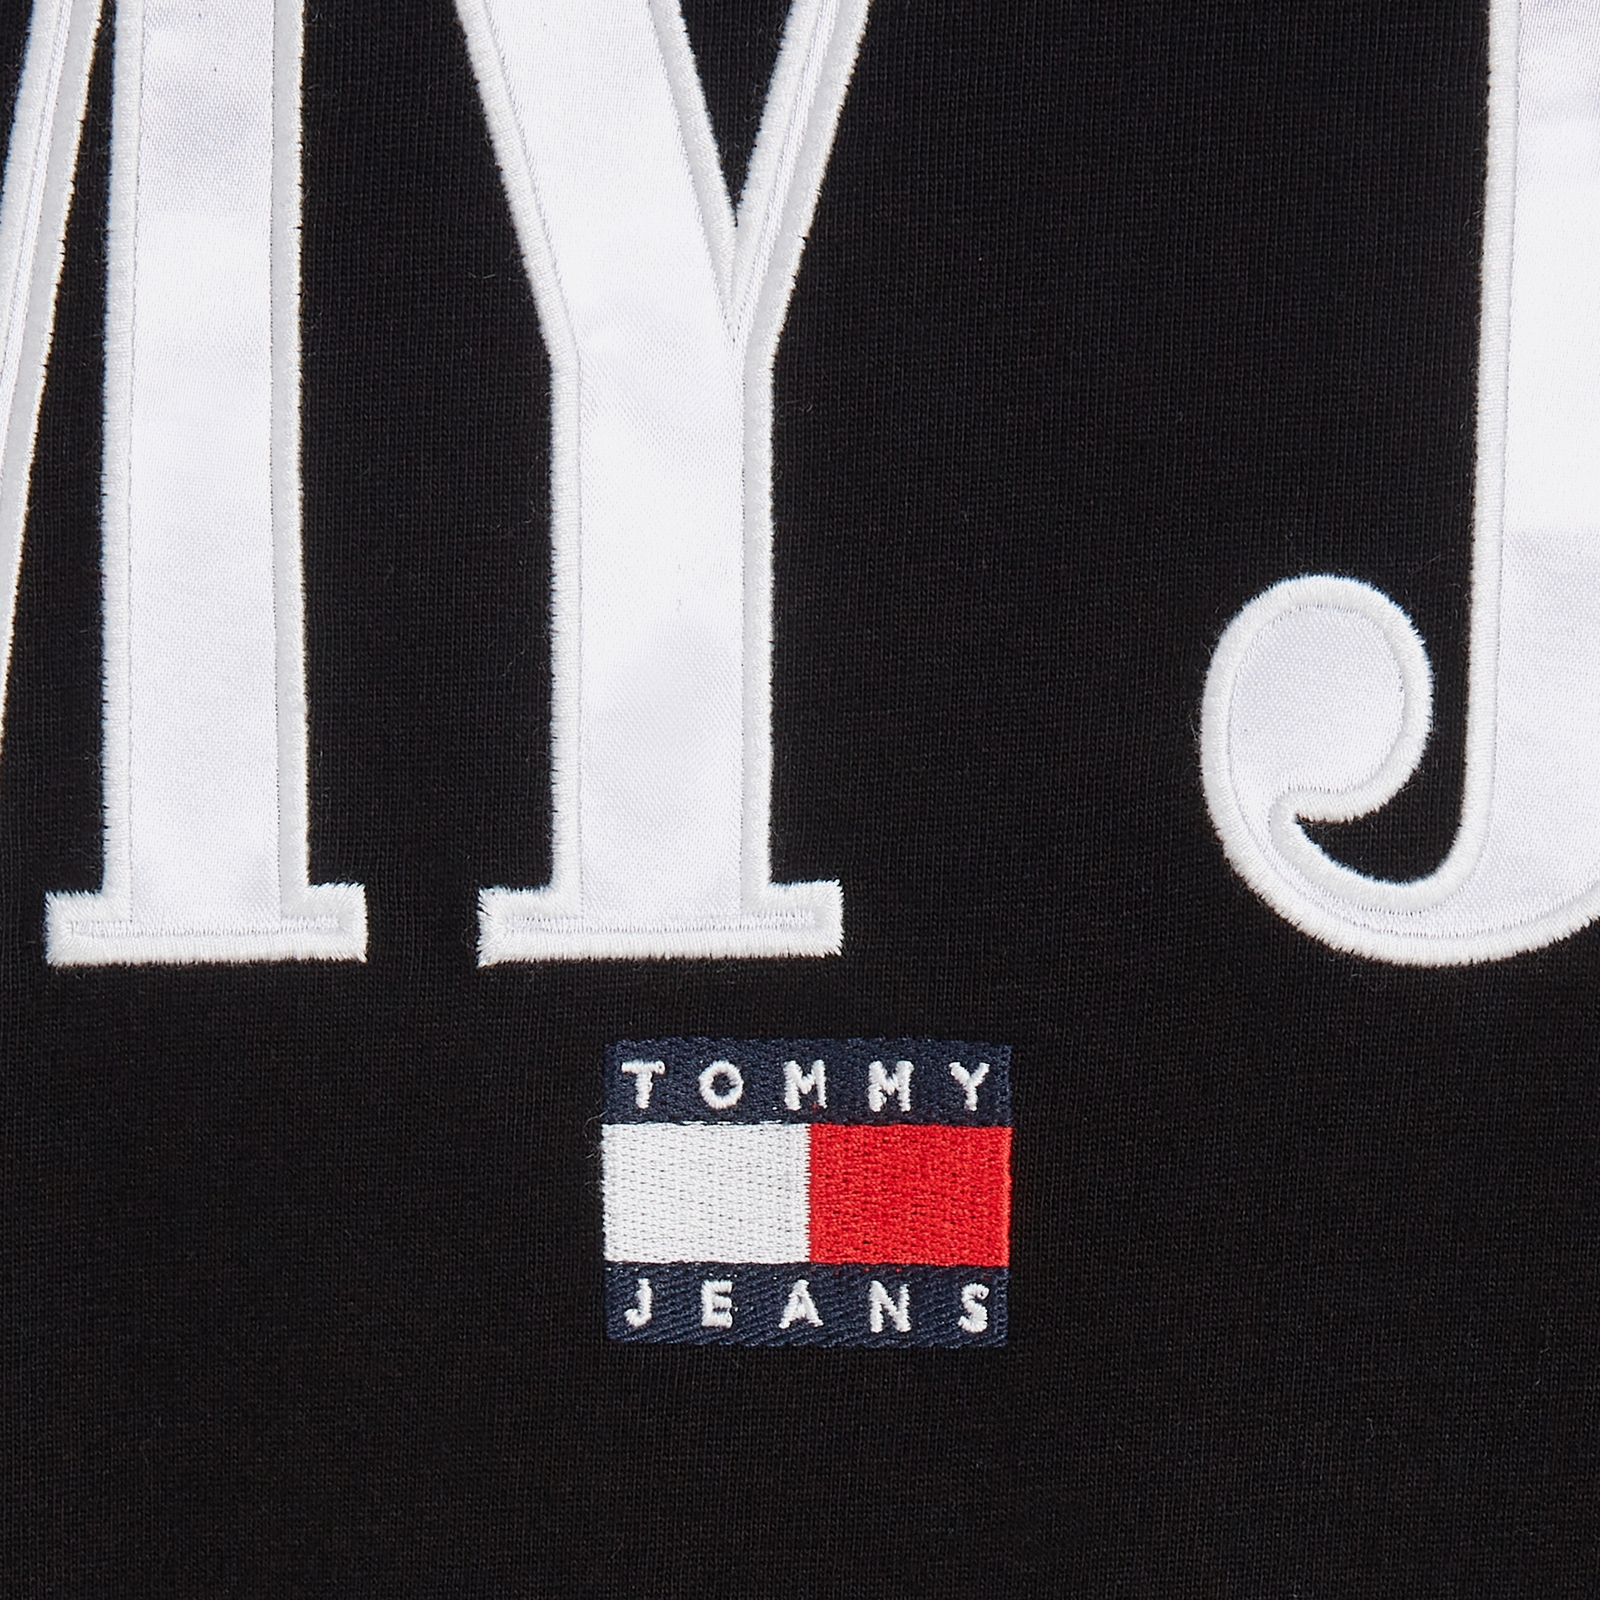 tommy jeans oversized cotton badge t-shirt - s